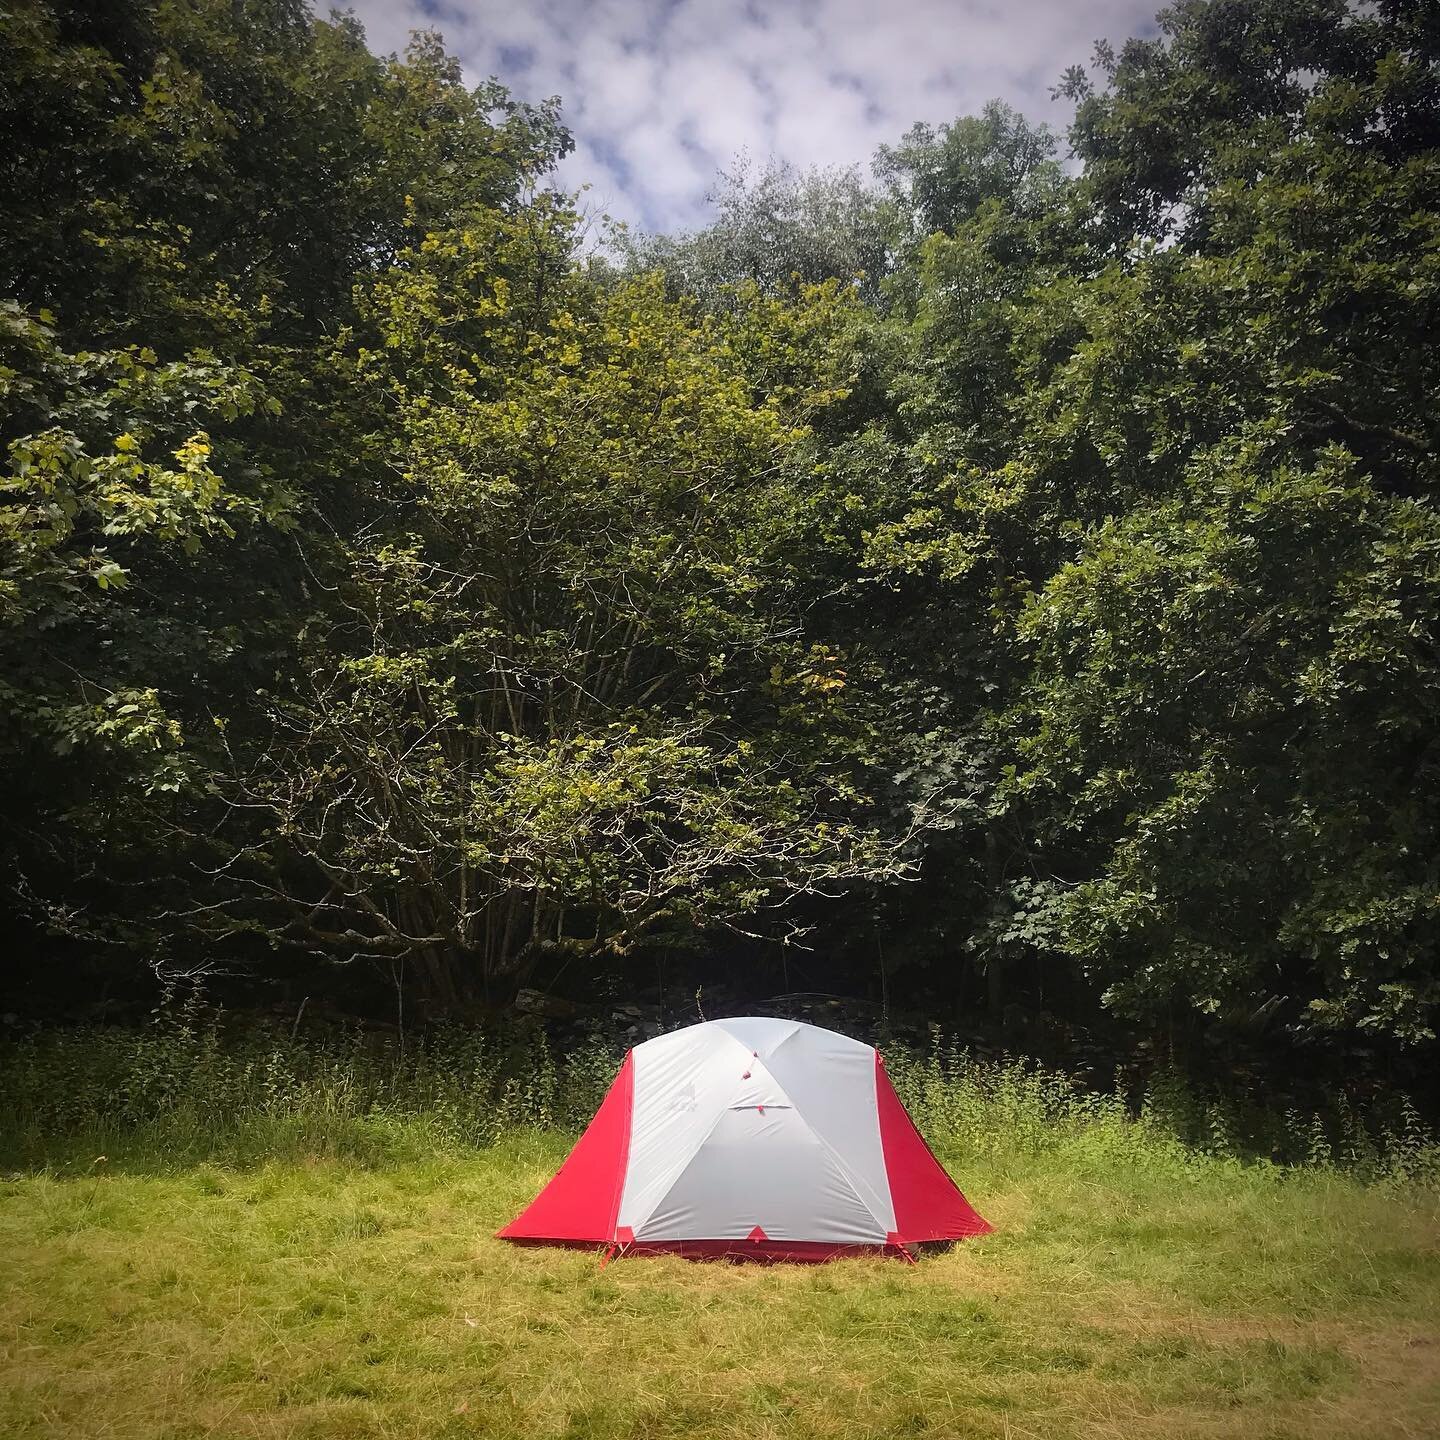 Tired of landscaped, artificial campsites with no space to breathe? 

Cefn coed offers woodland &amp; field pitches that take you back to how camping should truly be! 

Book your trip now! contact@cefncoed.co.uk